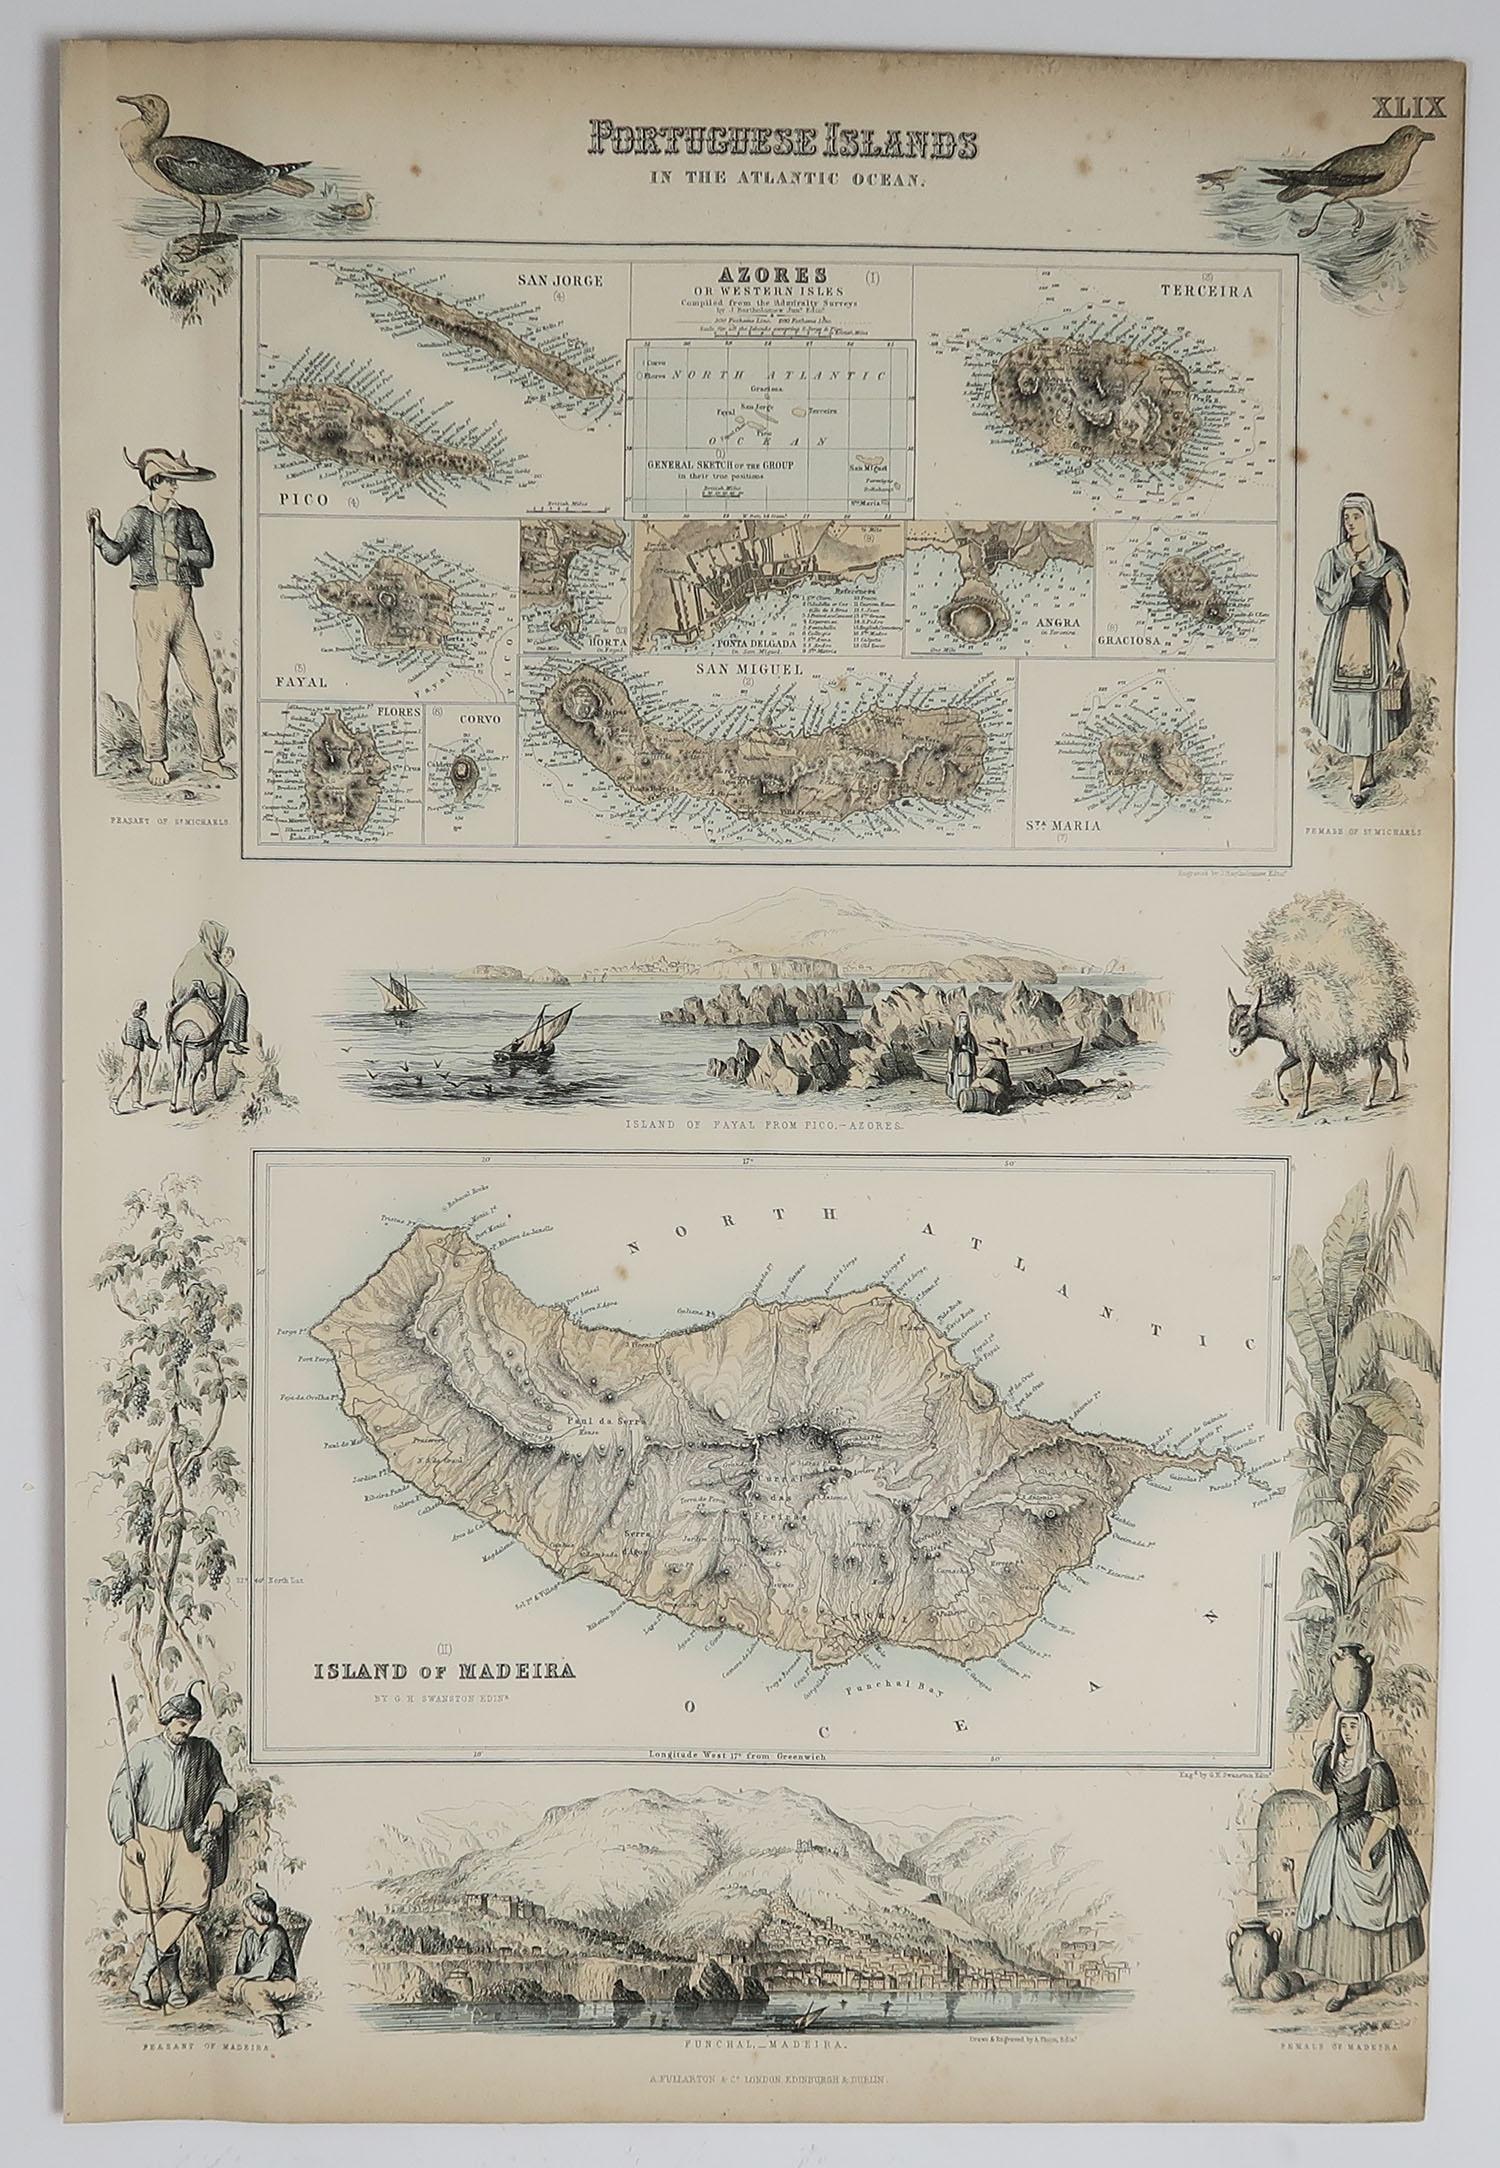 azores and madeira map